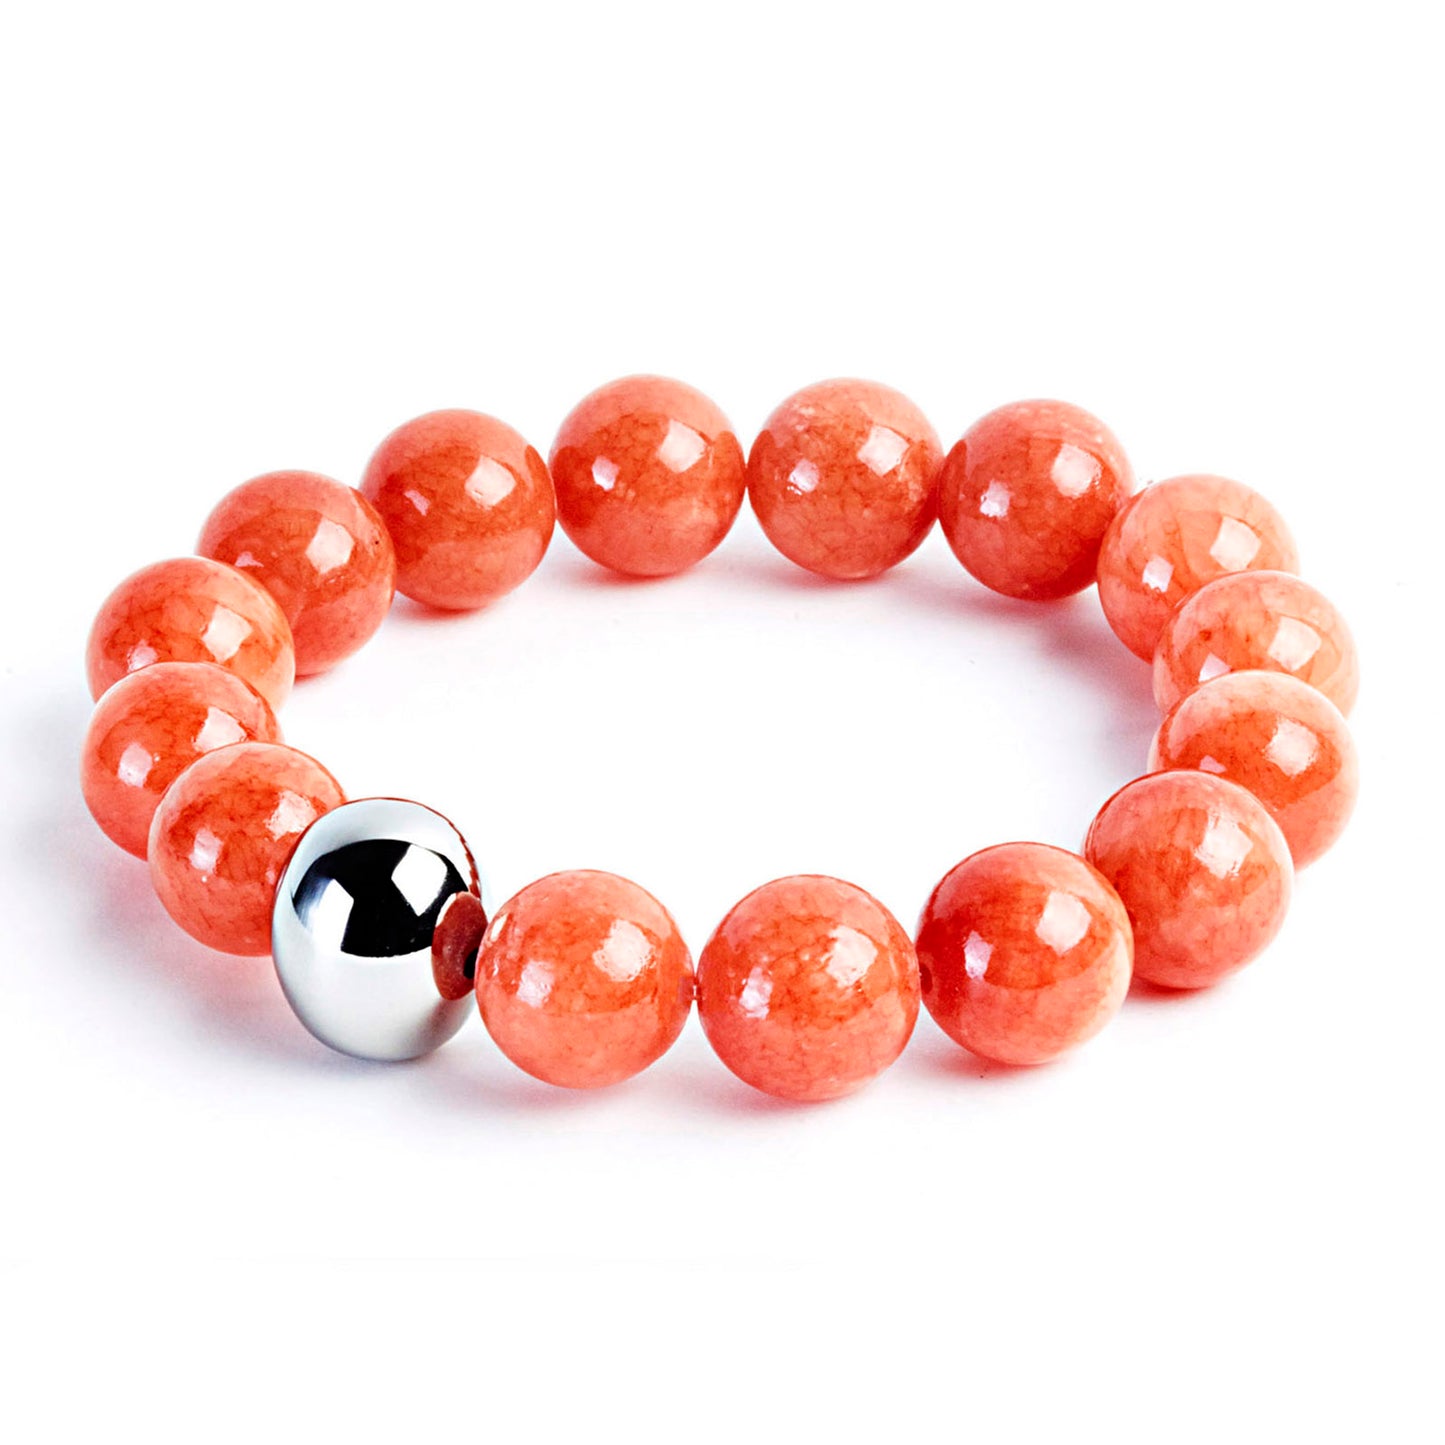 ELYA Colored Dyed Jade and Stainless Steel Bead Stretch Bracelet (12mm)